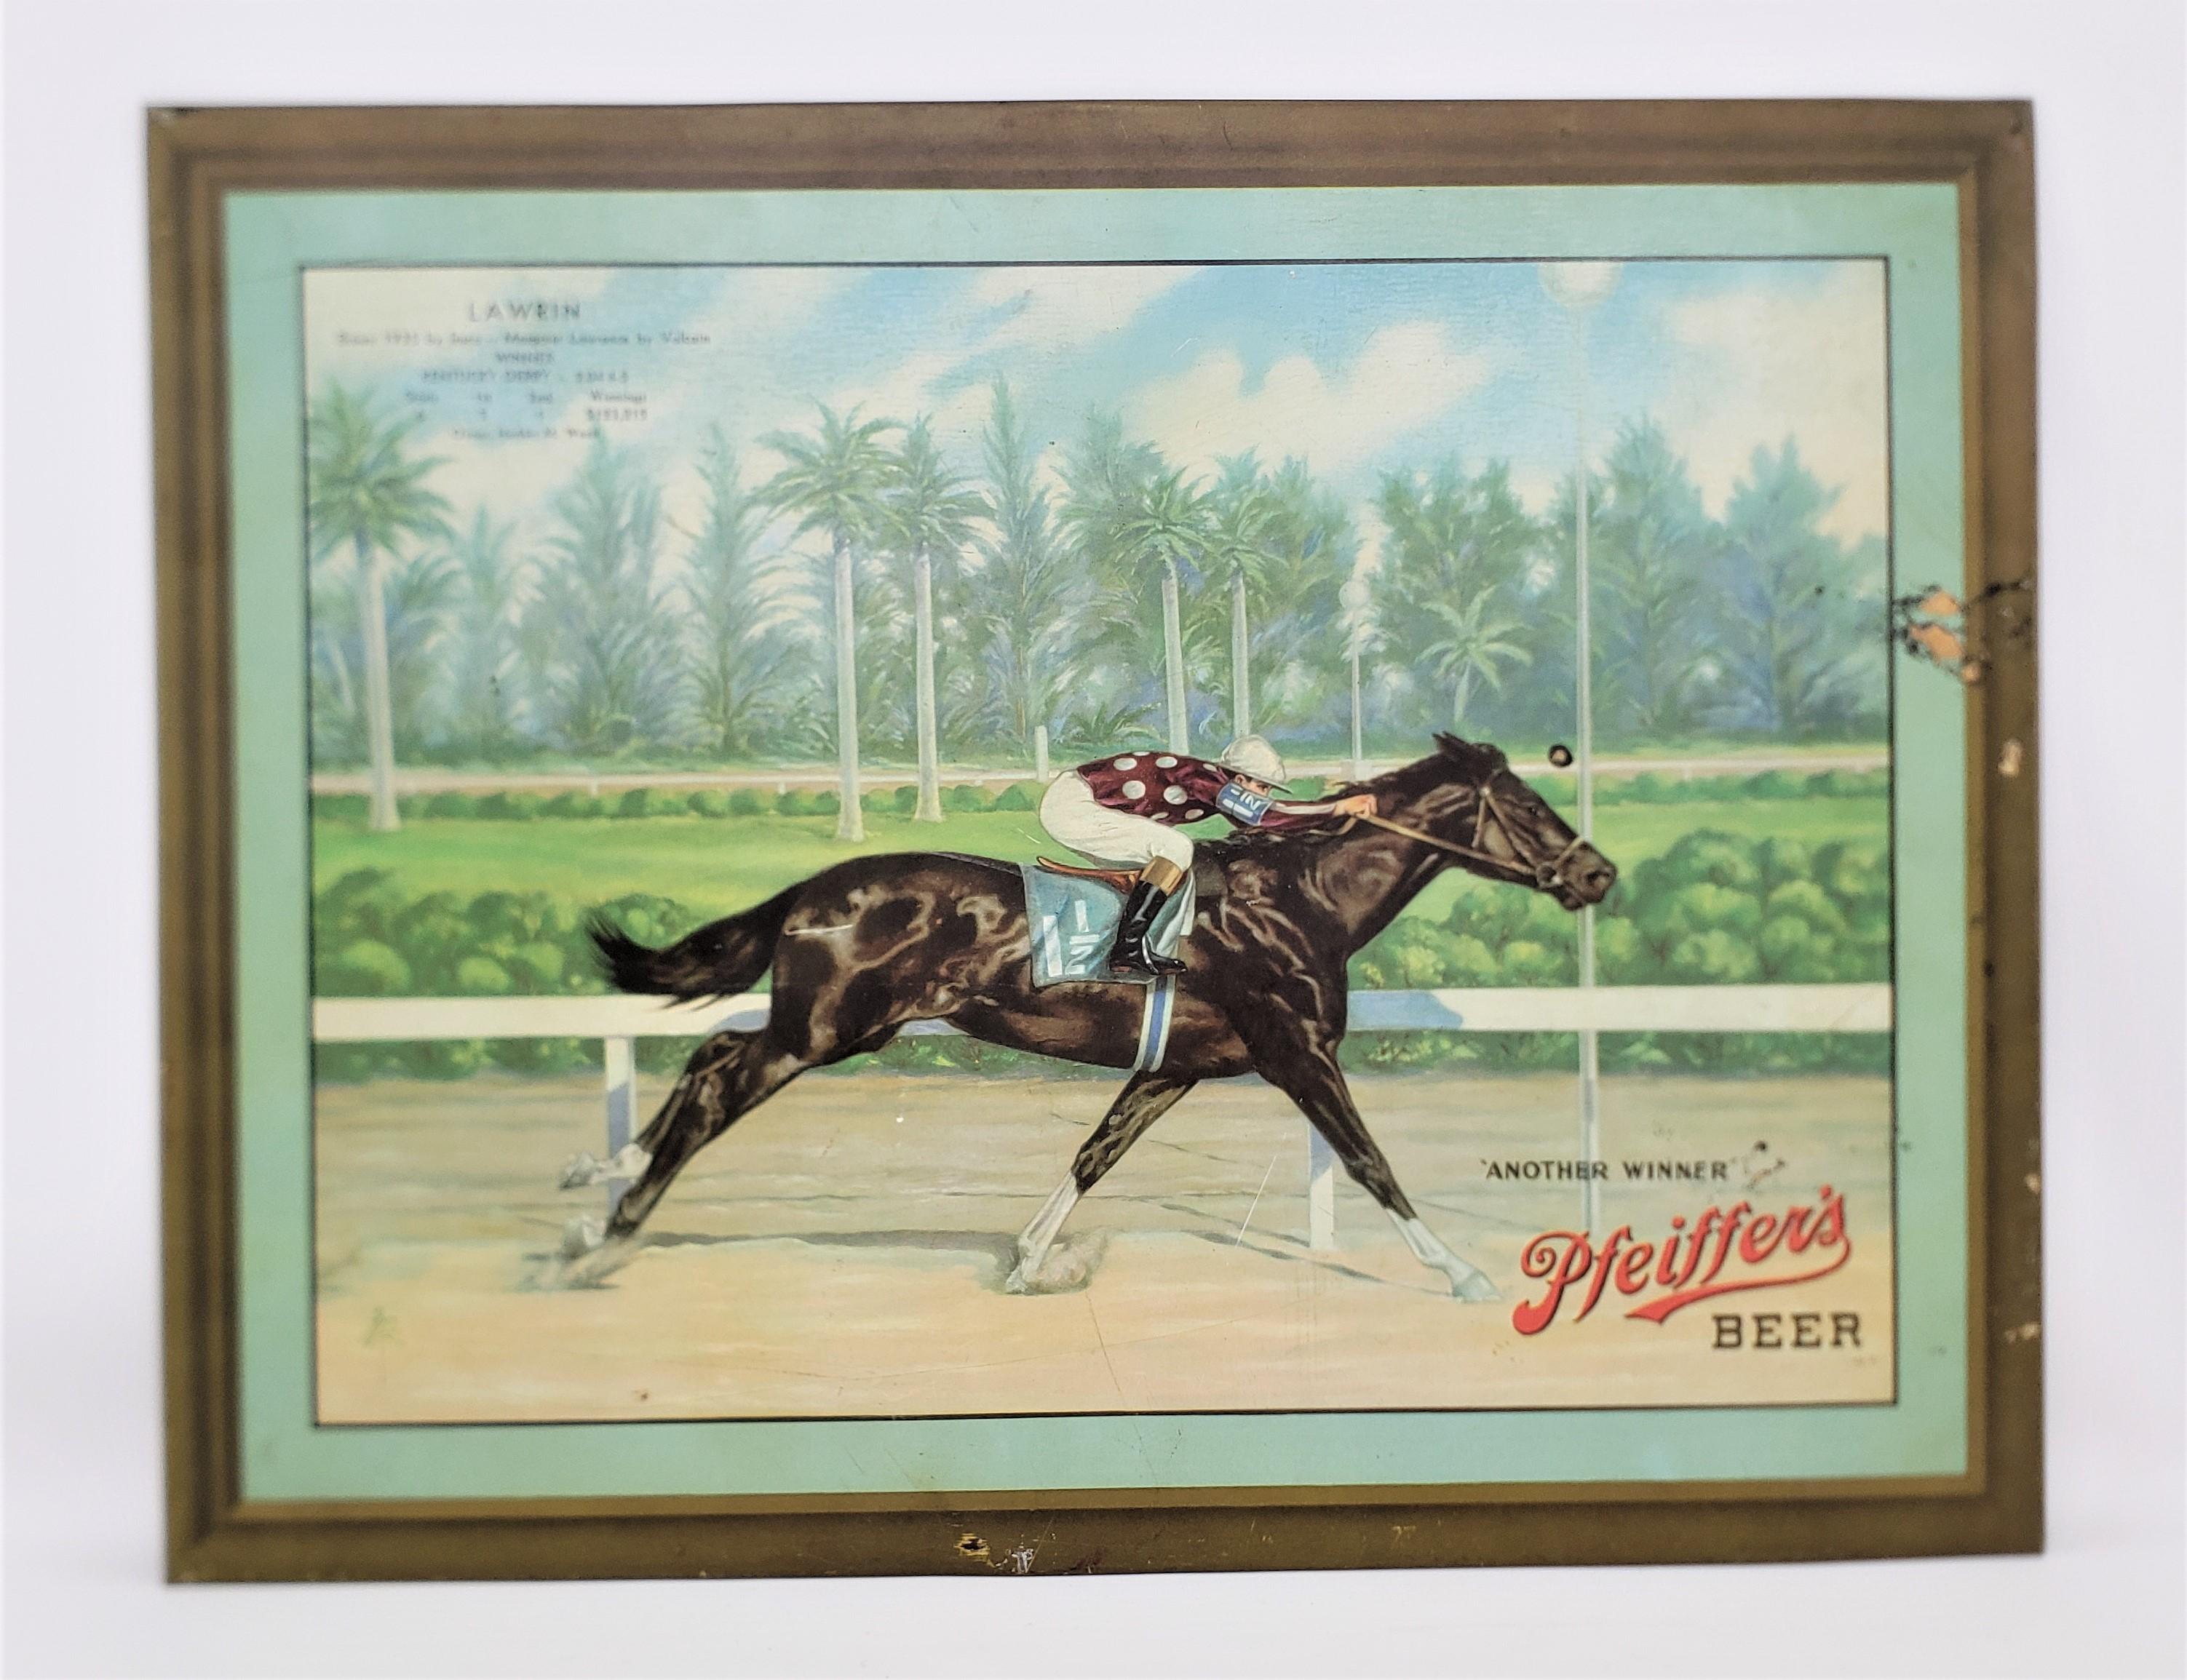 Mid-Century Modern Pair of Pfeiffer's Beer Advertising Wall Hangings with a Horse Racing Theme For Sale